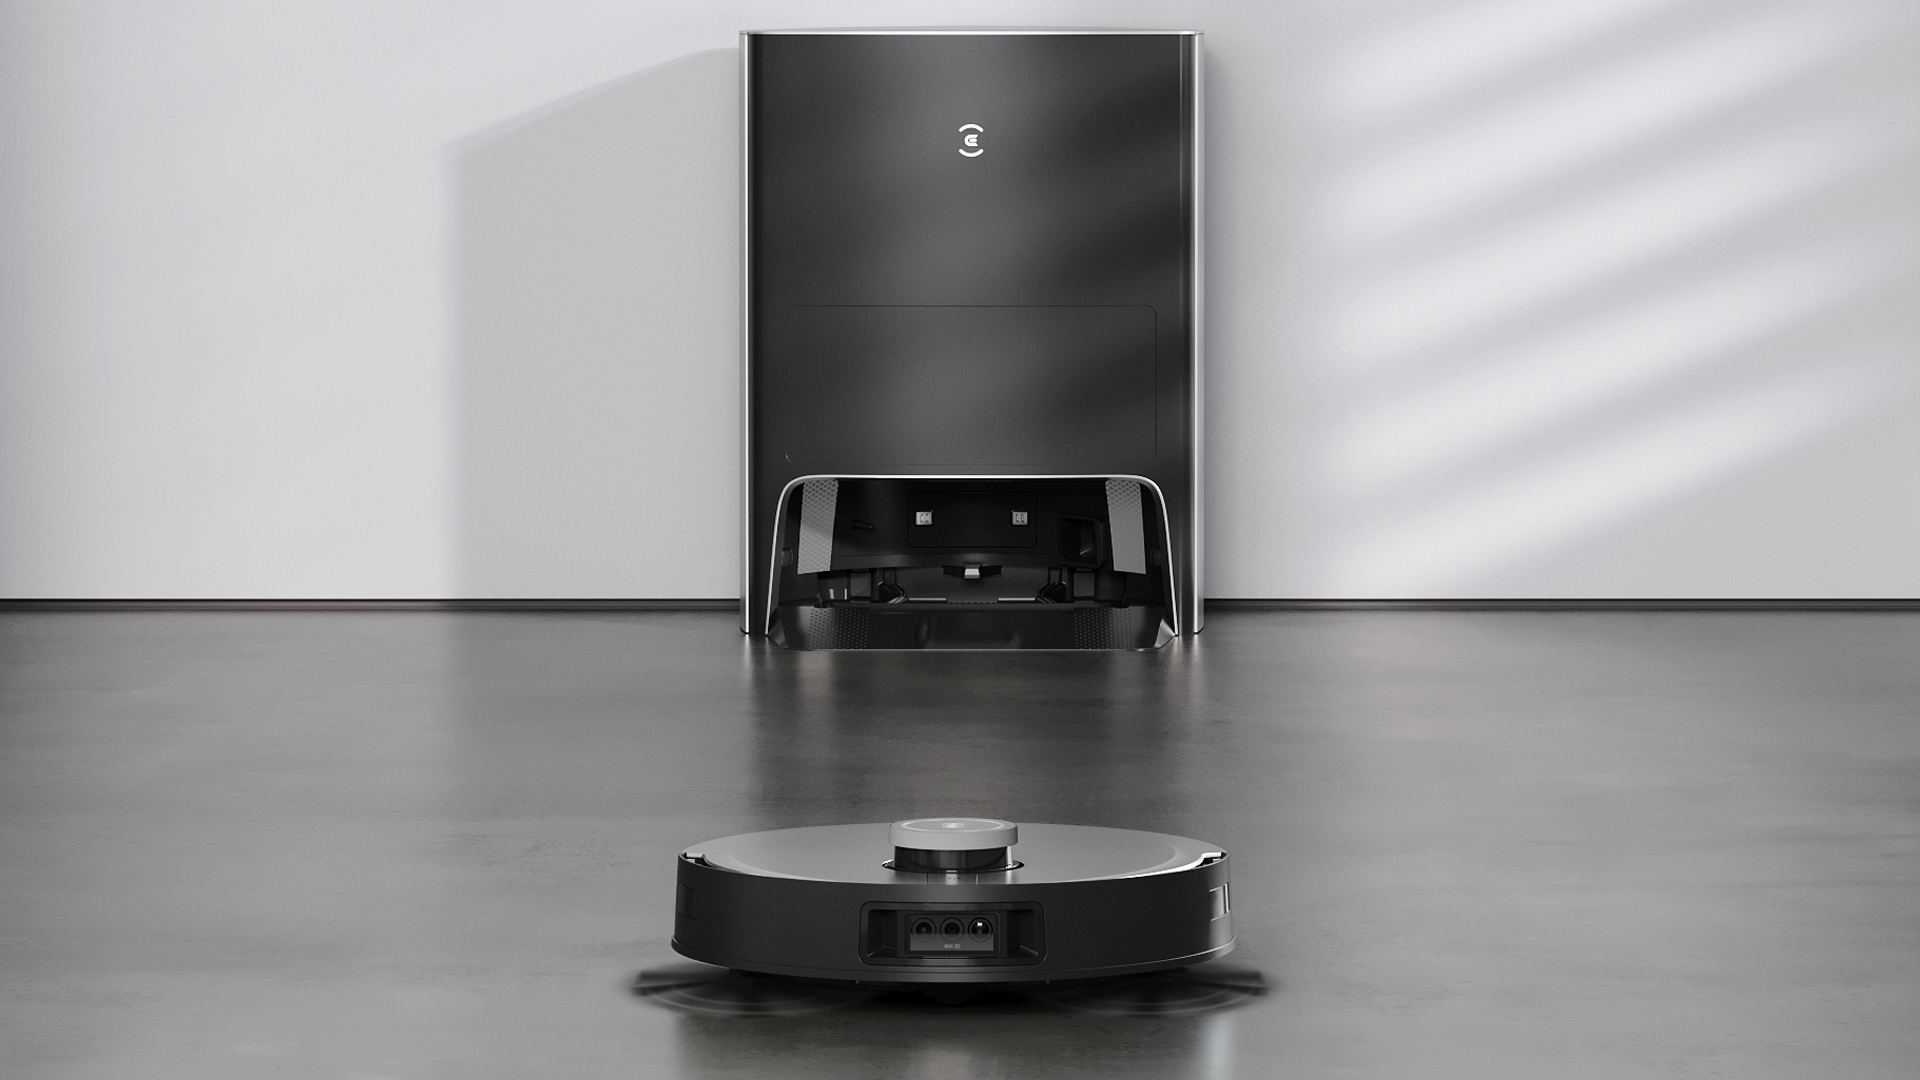 The ECOVACS Deebot X1 Omni robot vacuum and its docking station